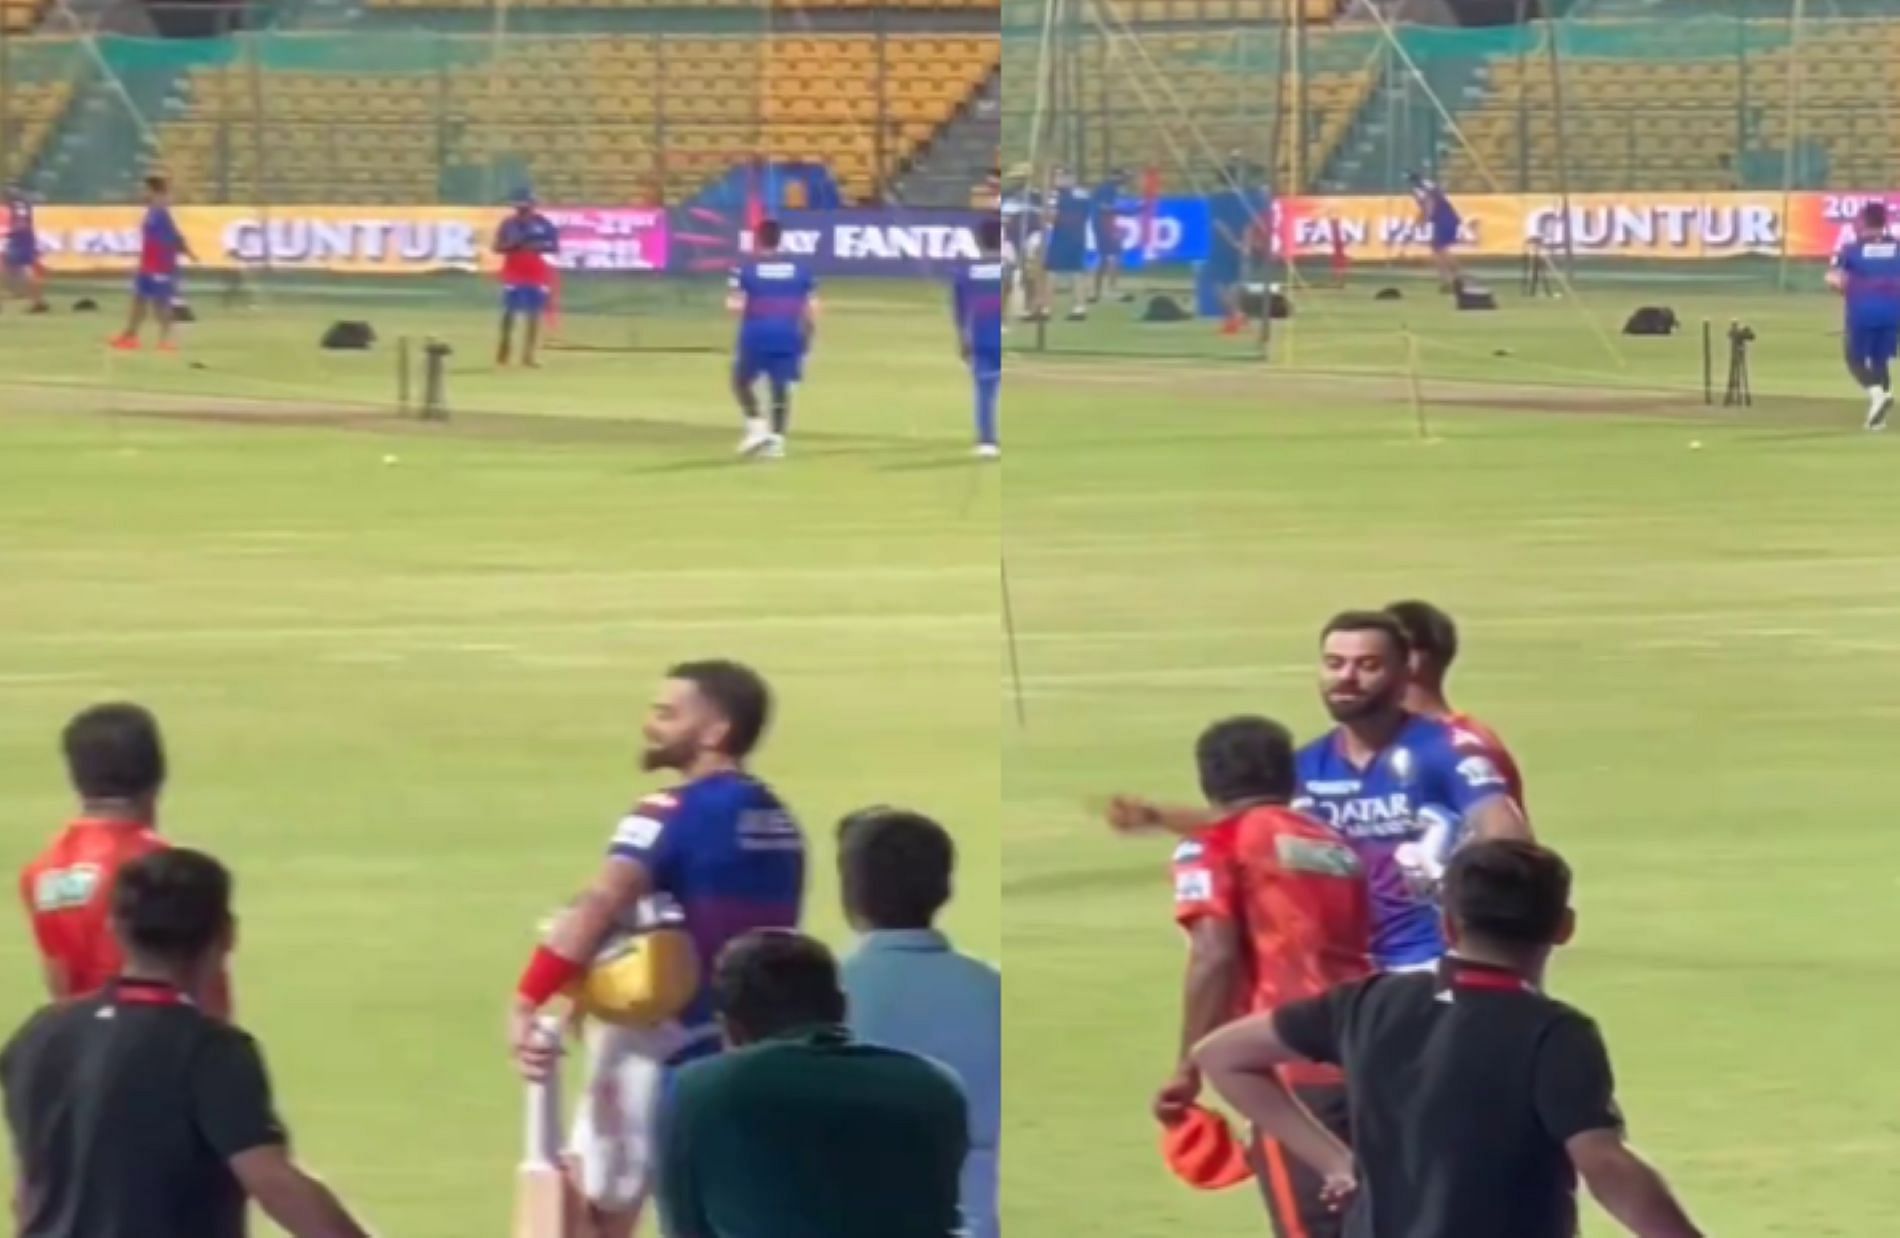 Kohli and Murali have a friendly interaction before the RCB-SRH clash [Credti: Fan Twitter handle]